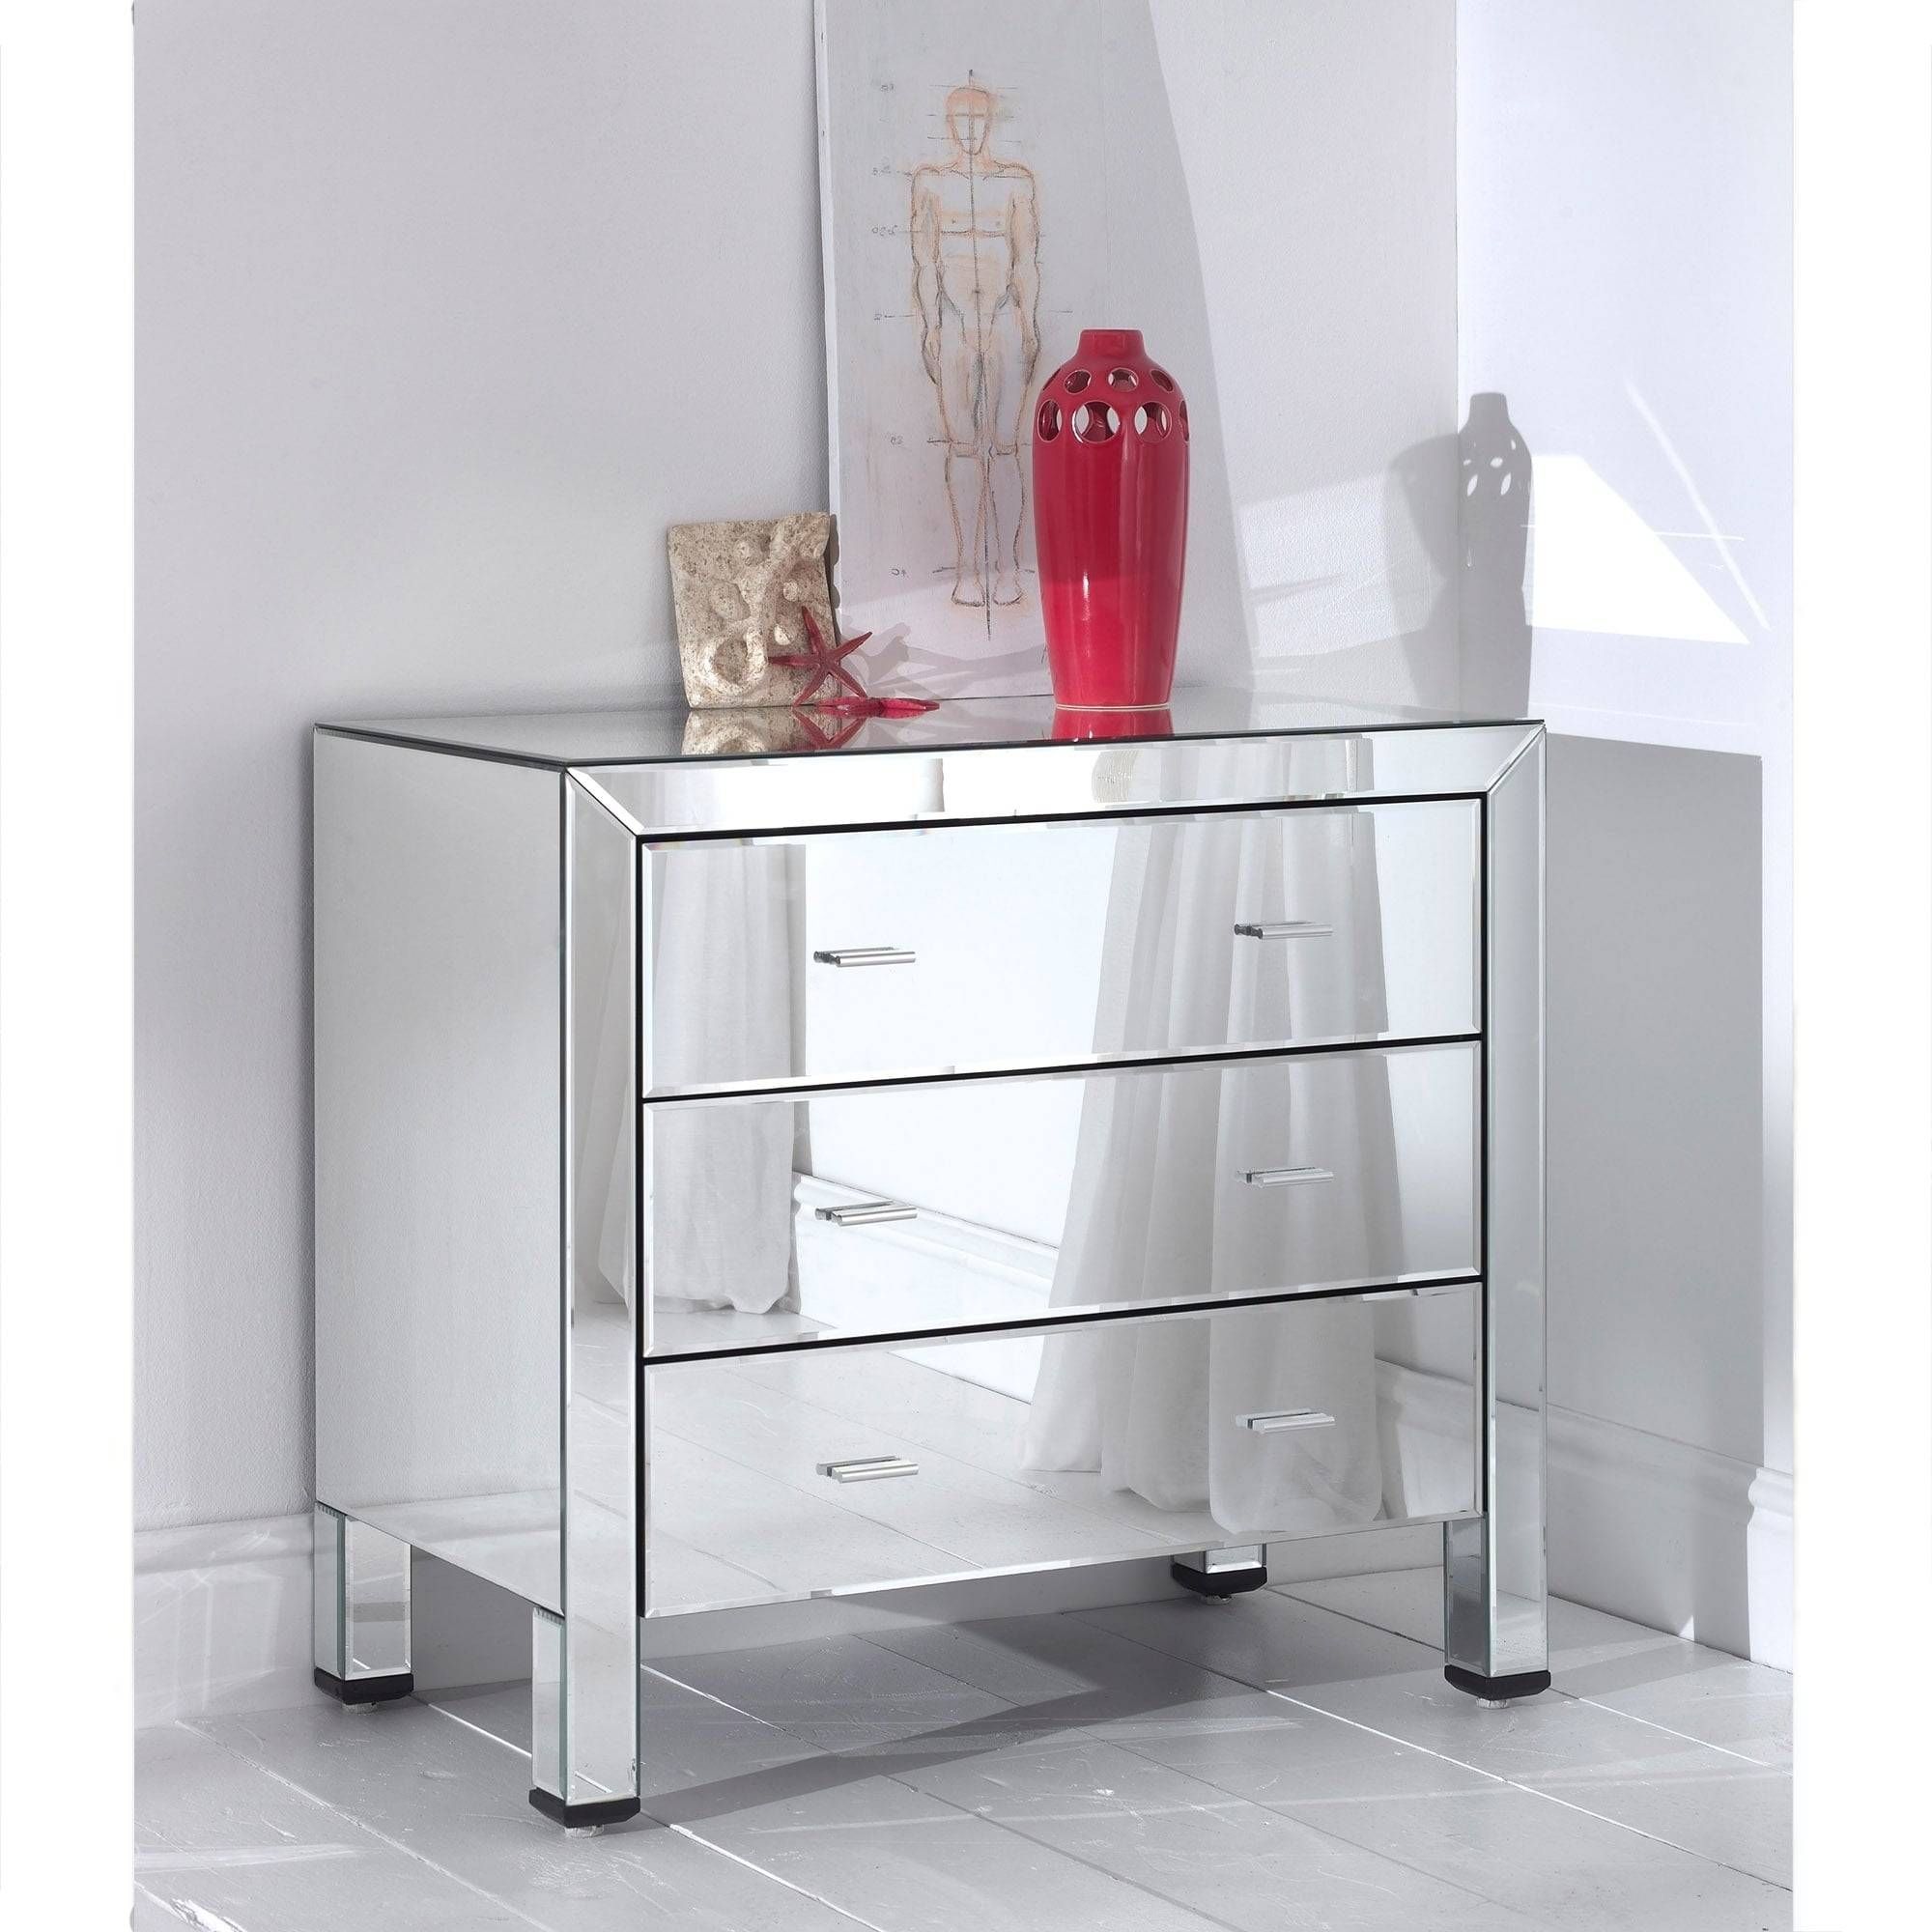 Romano Mirrored Wardrobe – French Furniture From Homesdirect 365 Uk Throughout Romano Mirrored Wardrobes (View 5 of 15)